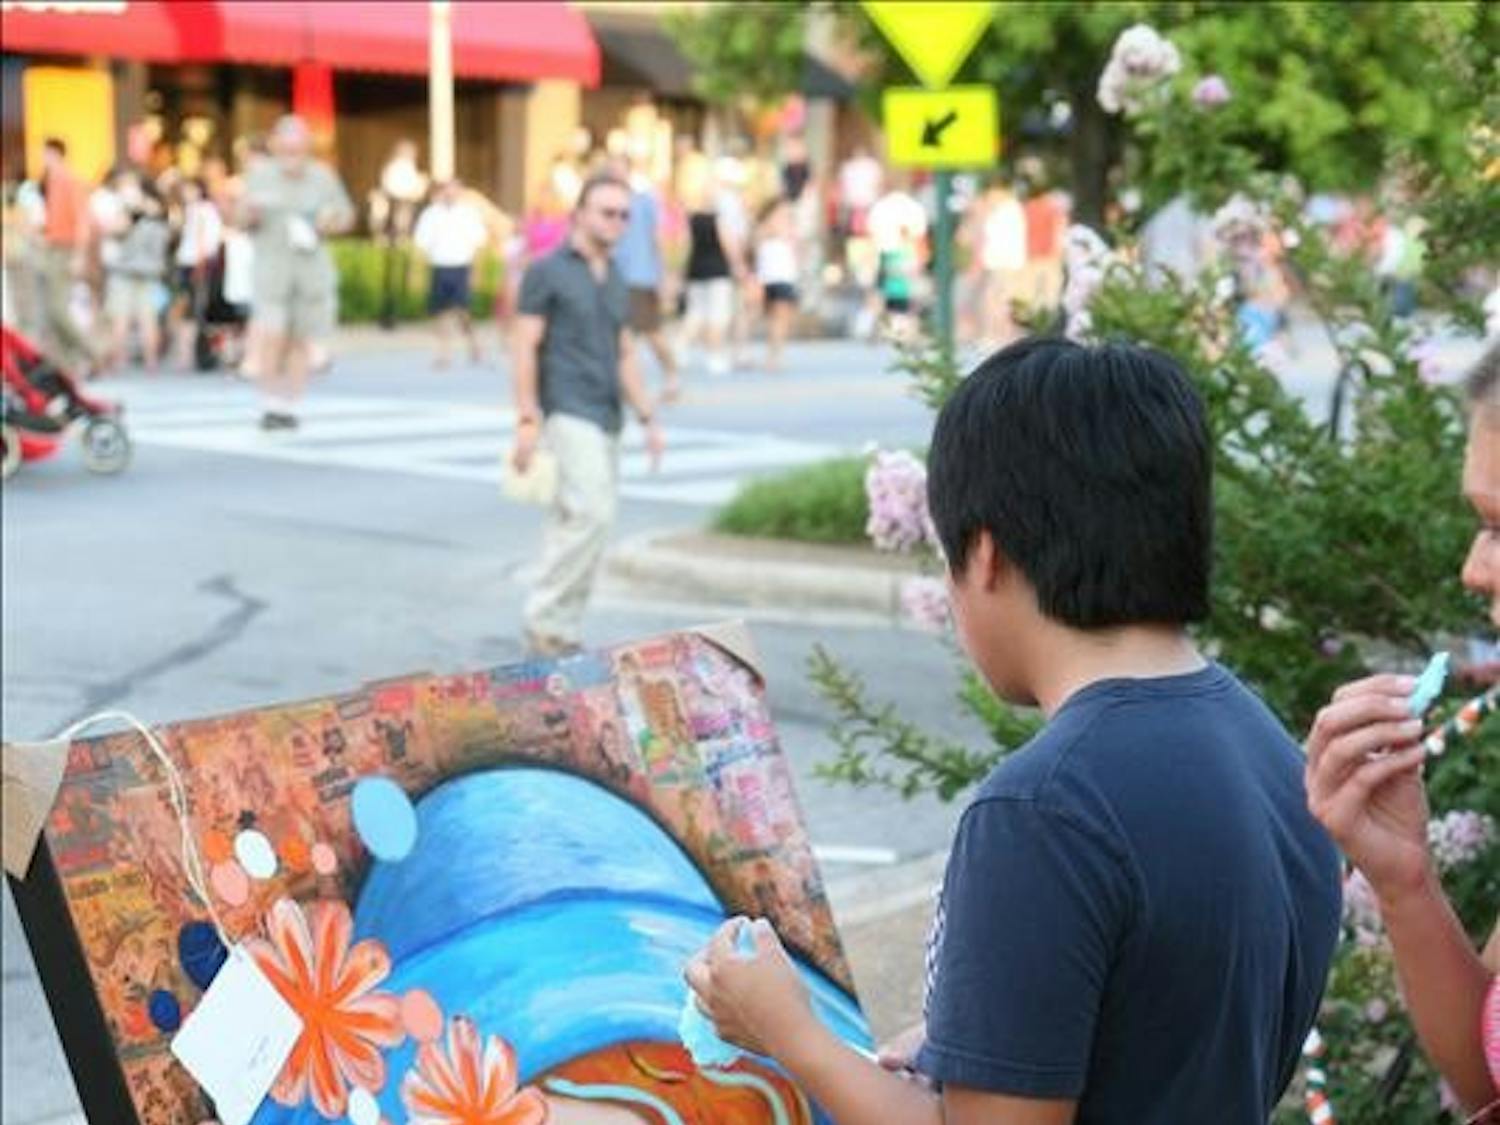 Onlookers participating in the 7th annual SummerNight's Art Walk